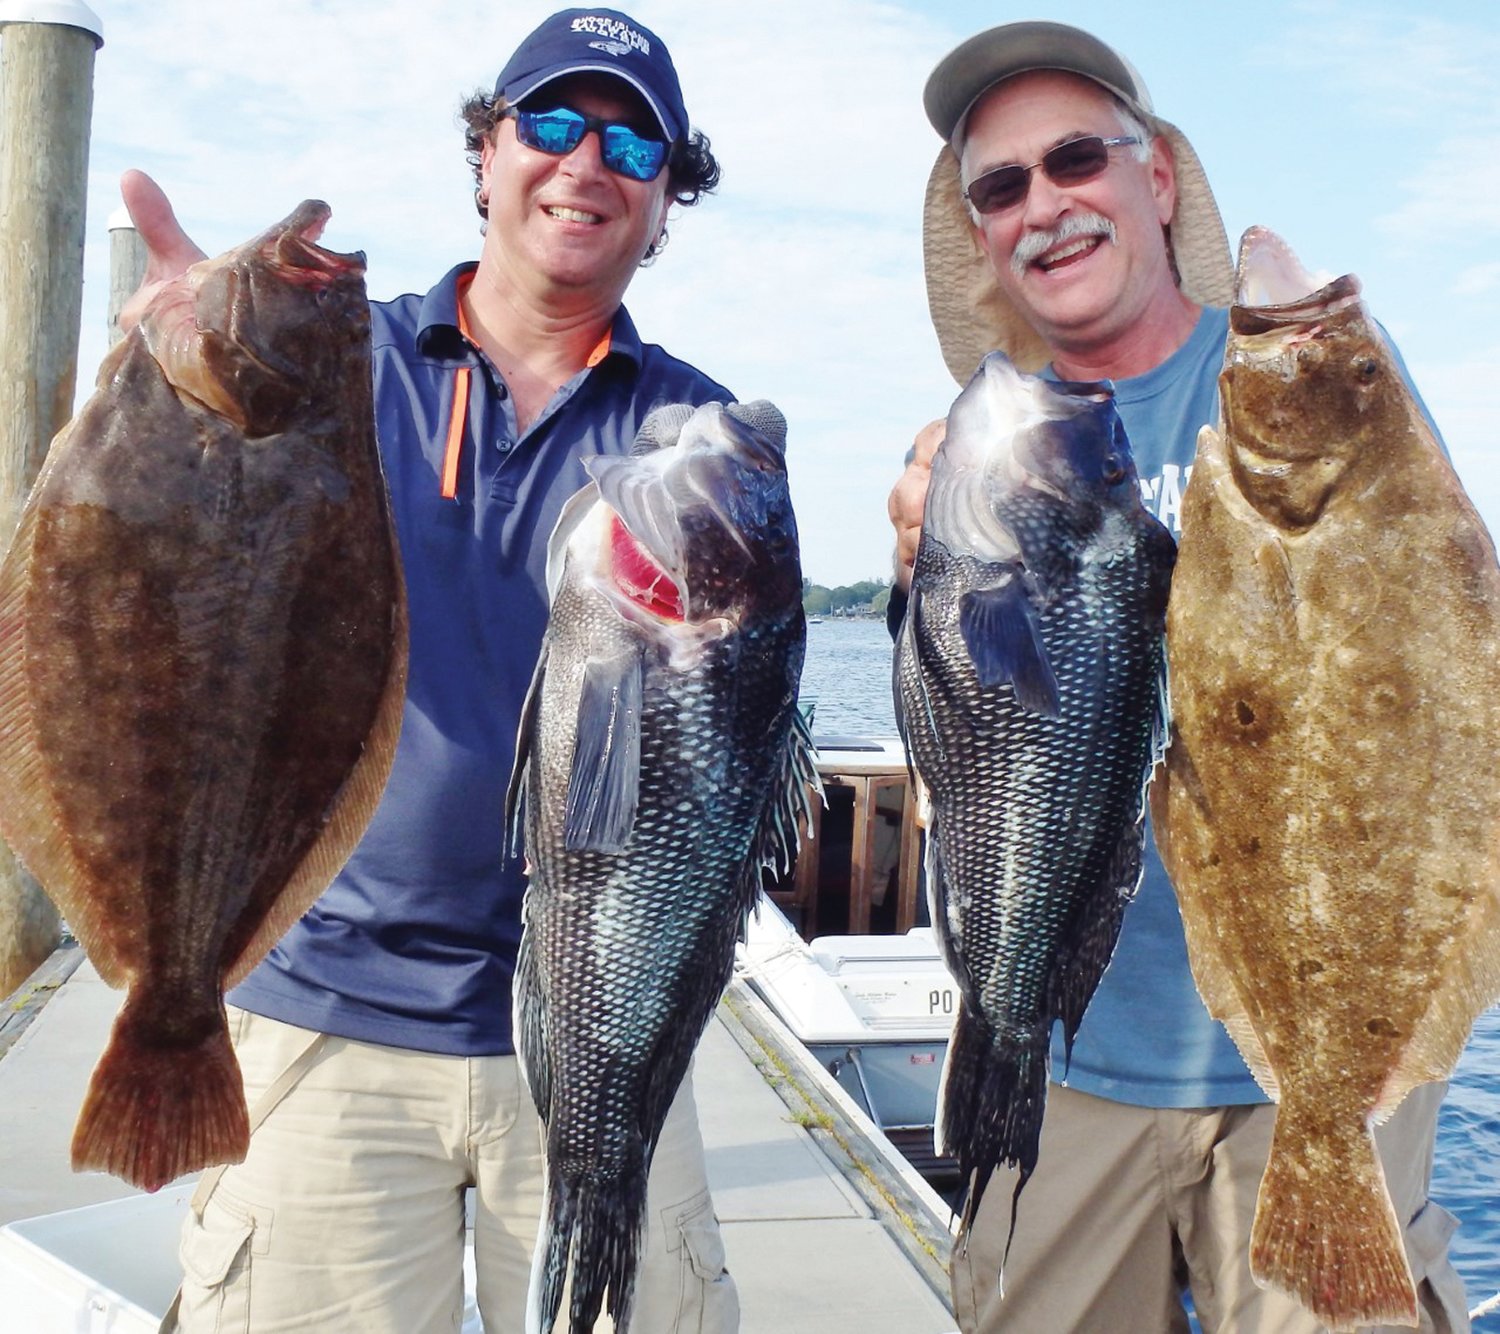 MULTI SPECIES TOURNAMENT: The Block Island Inshore Fishing Tournament will include fluke, black sea bass, striped bass, bluefish, boat, shore, fly fishing, youth, team and wind farm photo divisions. (Submitted photos)